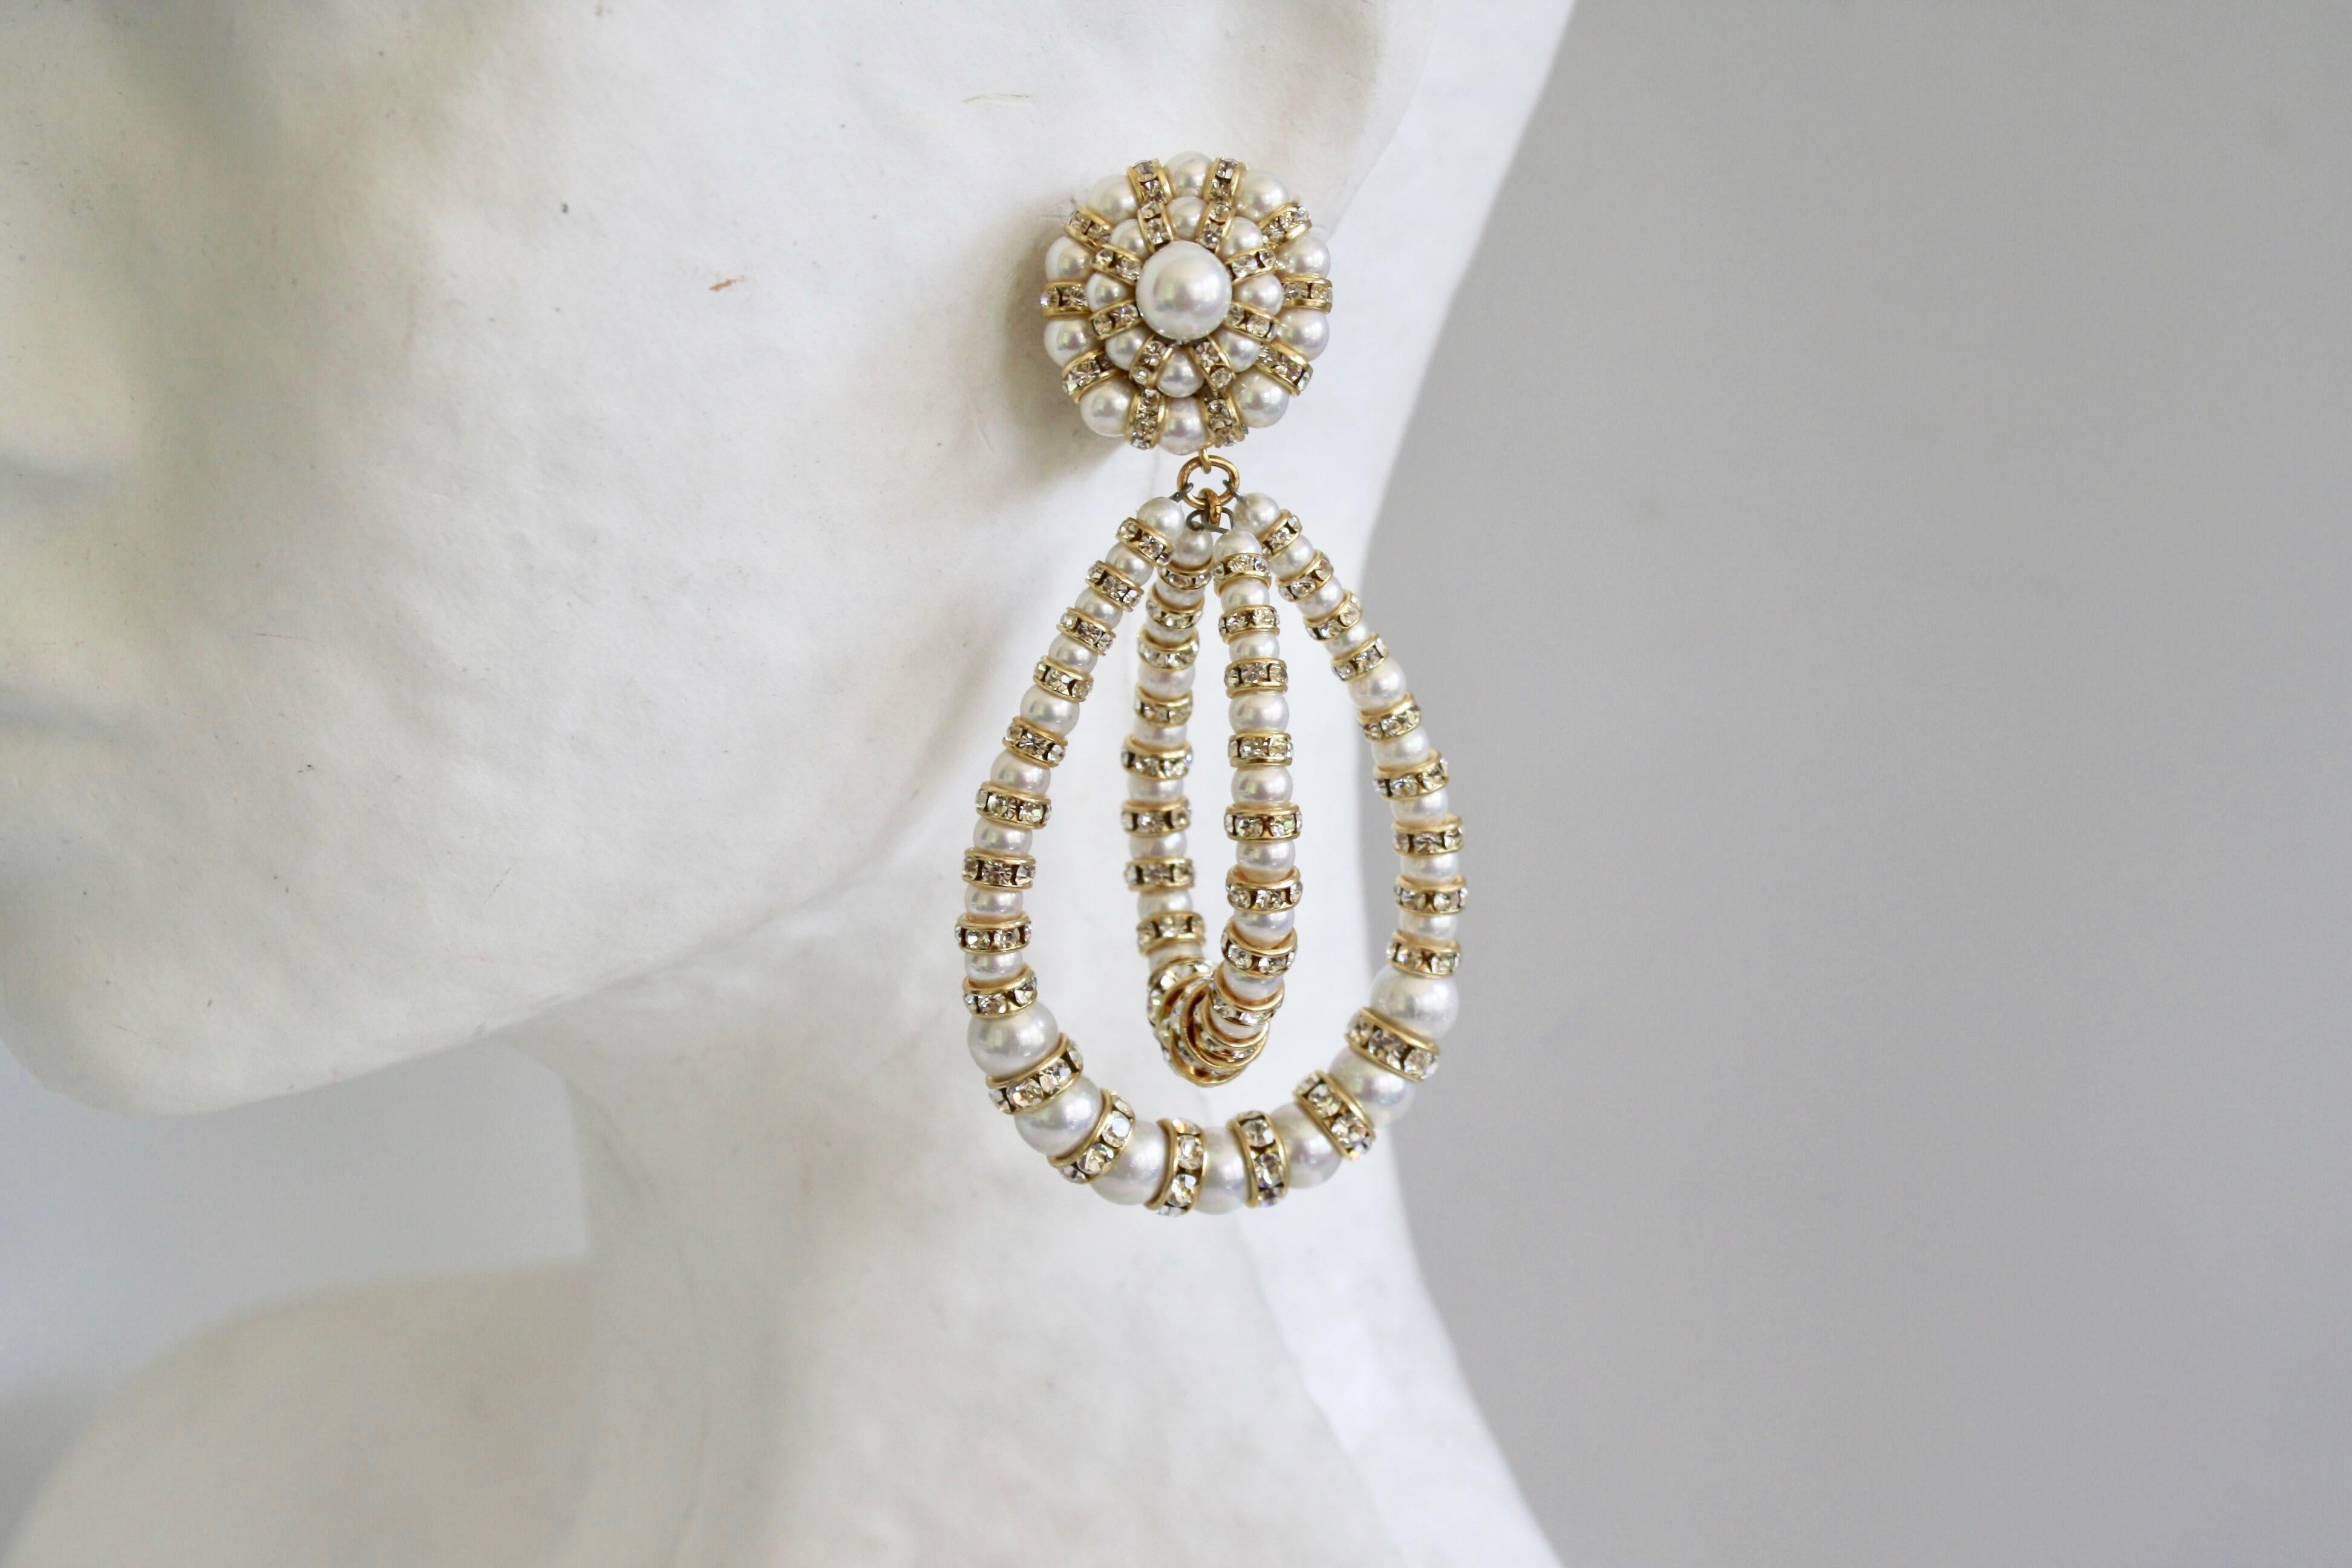 Iconic earring style from famed jewelry design house Francoise Montague. Made with glass pearl vintage beads and Swarovski Crystal rondelles on gold.